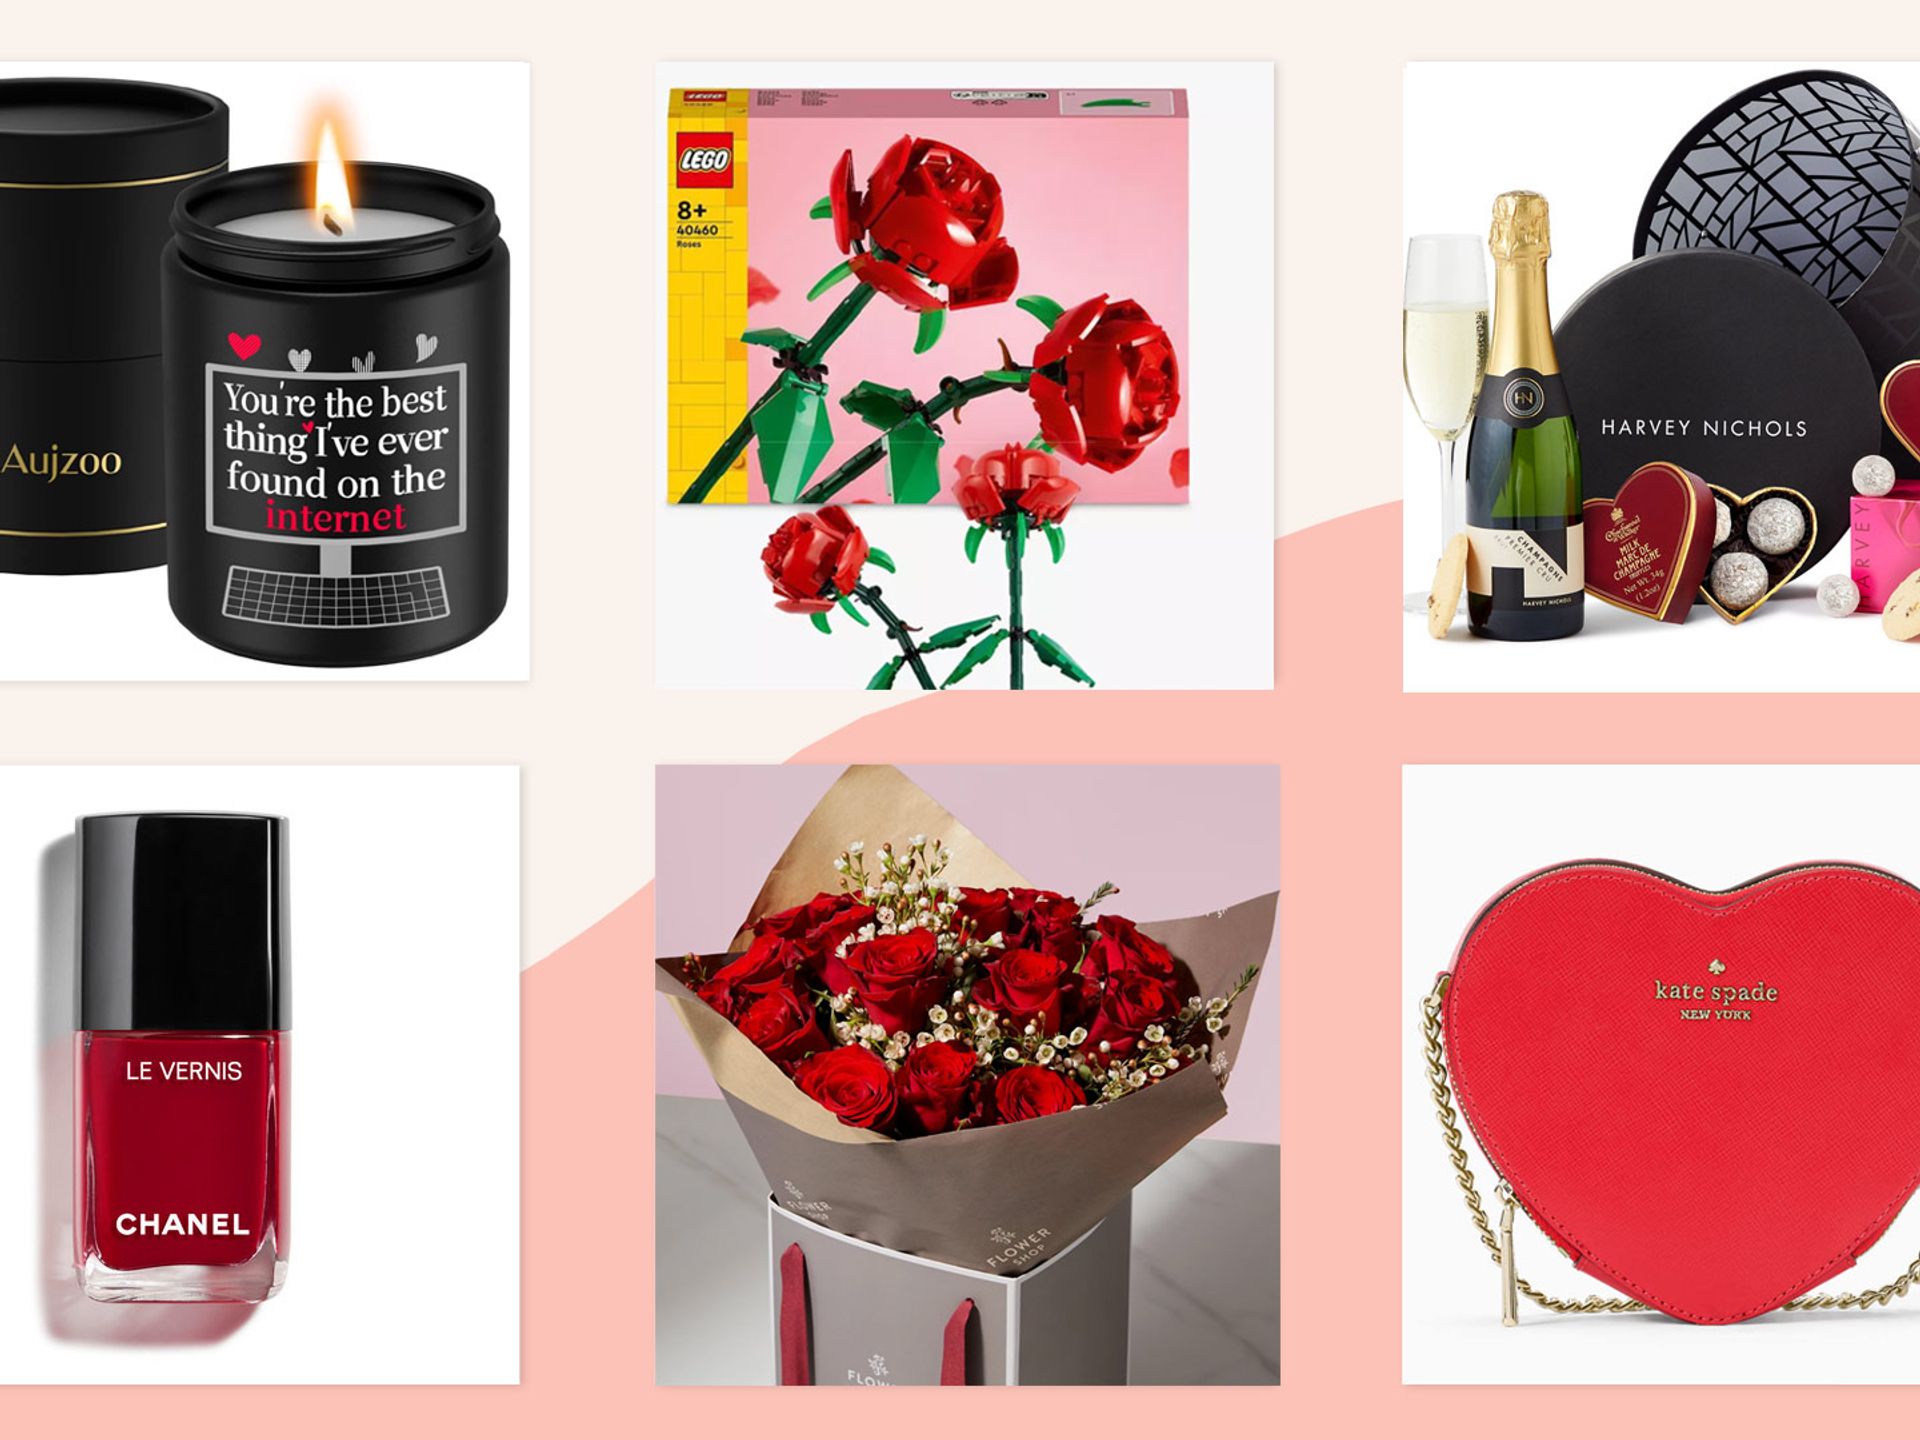 Valentine's Day Gifts for Daughter - Laura Fuentes